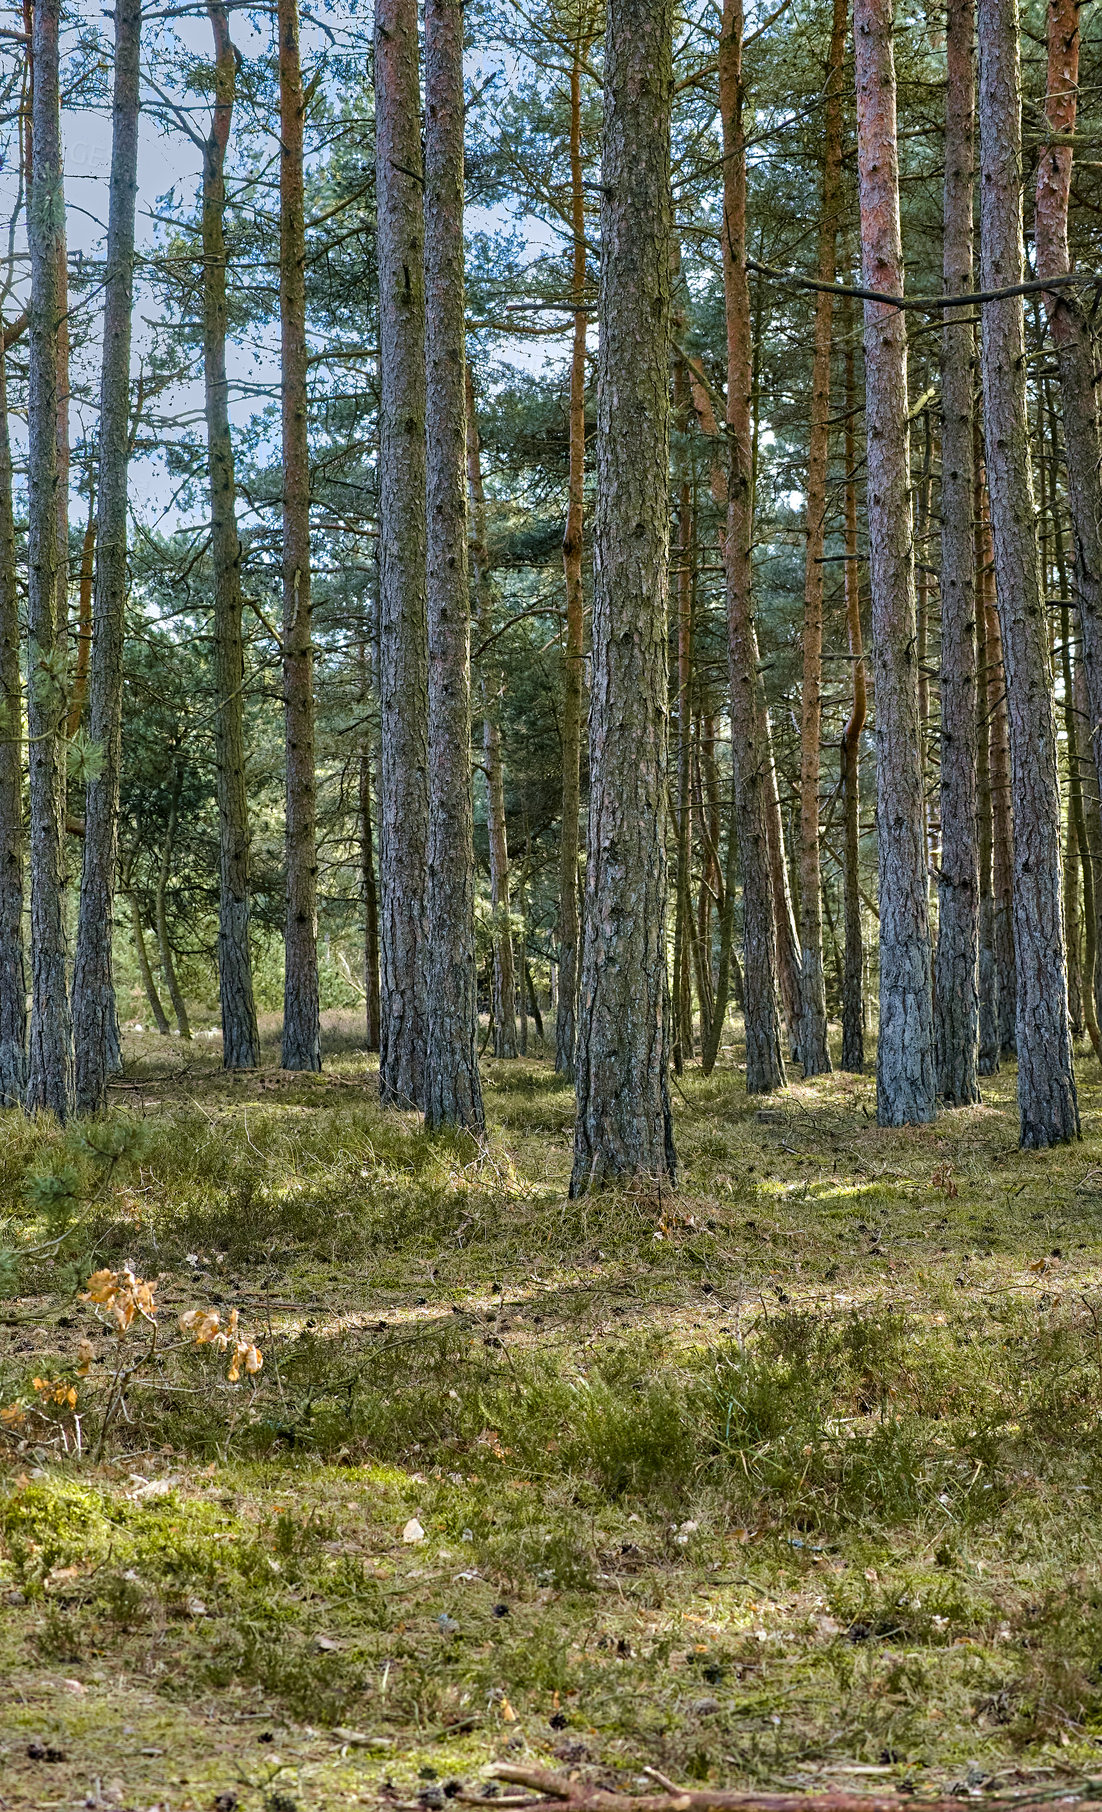 Buy stock photo Landscape view of pine, fir or cedar trees growing in a remote, coniferous forest in Denmark. Woods and lush plants in environmental nature conservation for production and export of resin and timber